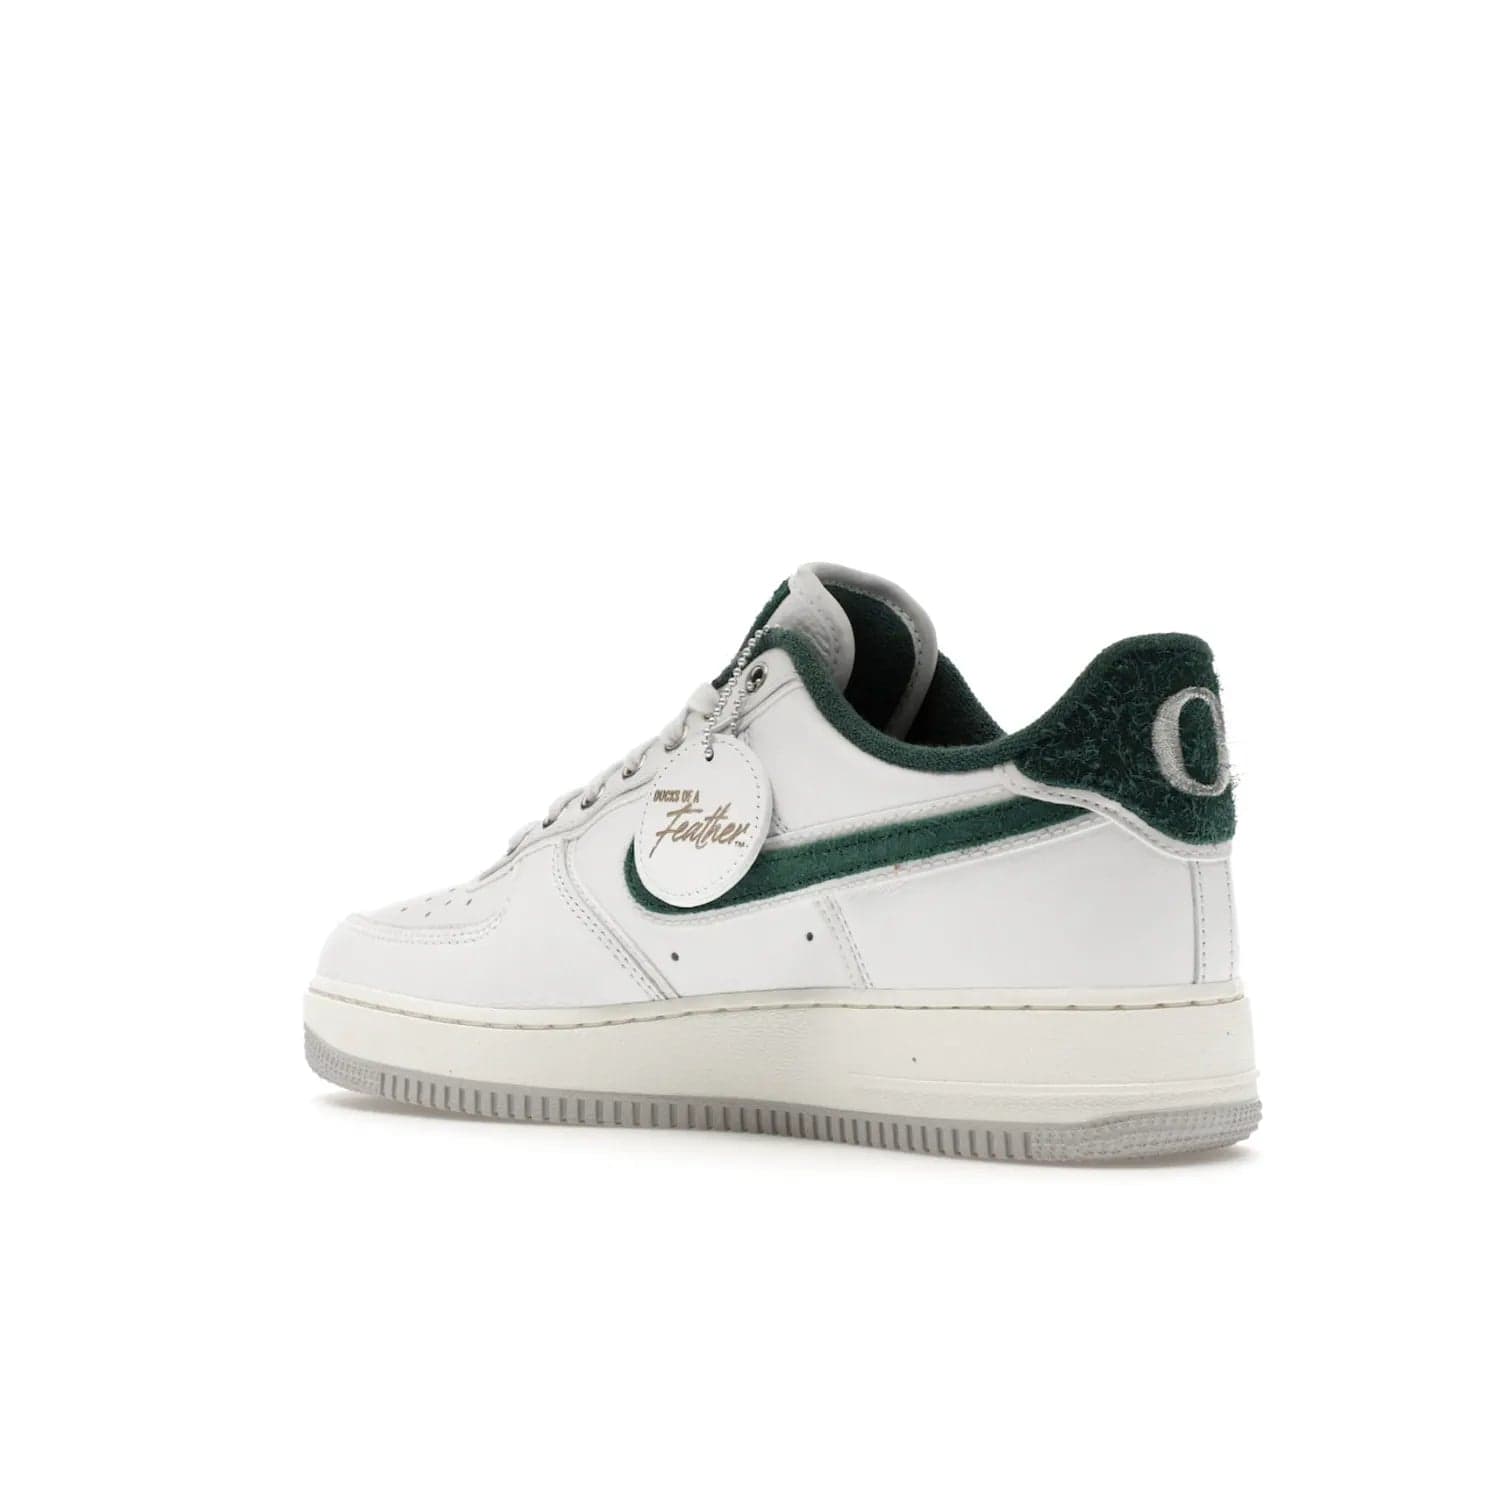 Nike Air Force 1 Low '07 Premium University of Oregon PE - Image 23 - Only at www.BallersClubKickz.com - The Nike Air Force 1 Low '07 Premium. Special Oregon University colorway. White base with green and sail accents. Cushioned rubber midsole. Comfort and style. Support your school!